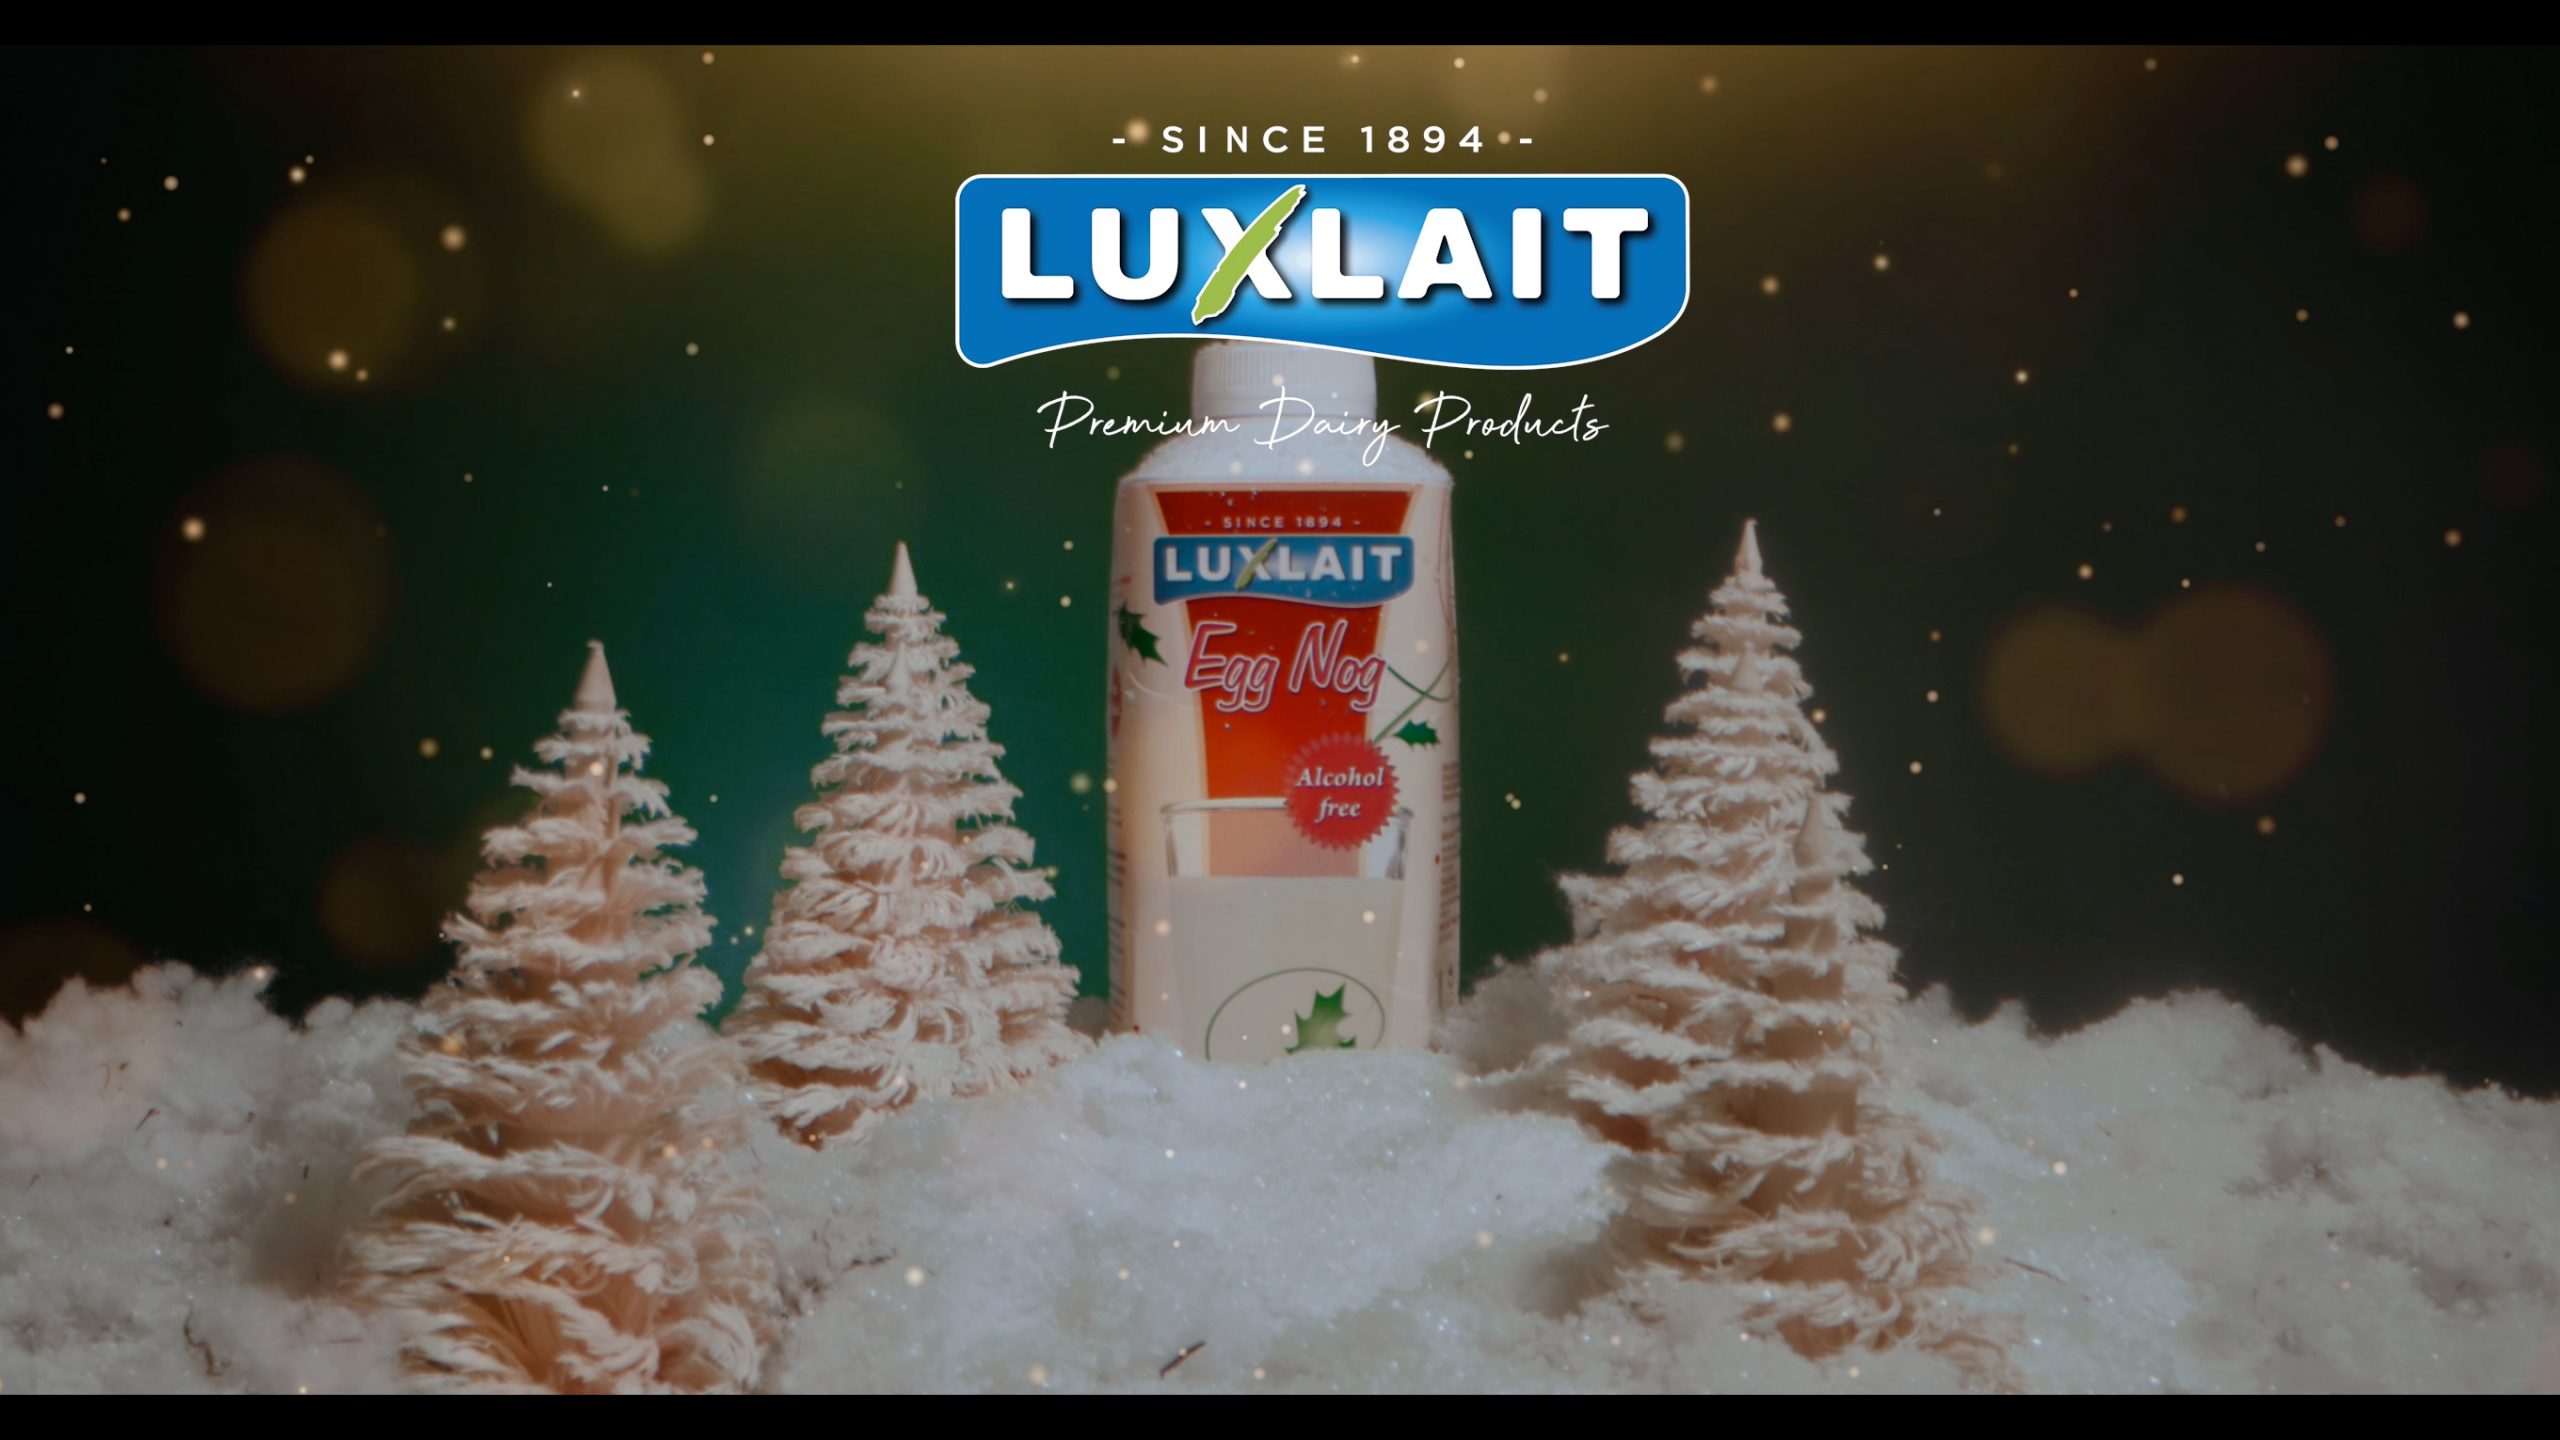 Luxlait Luxembourg